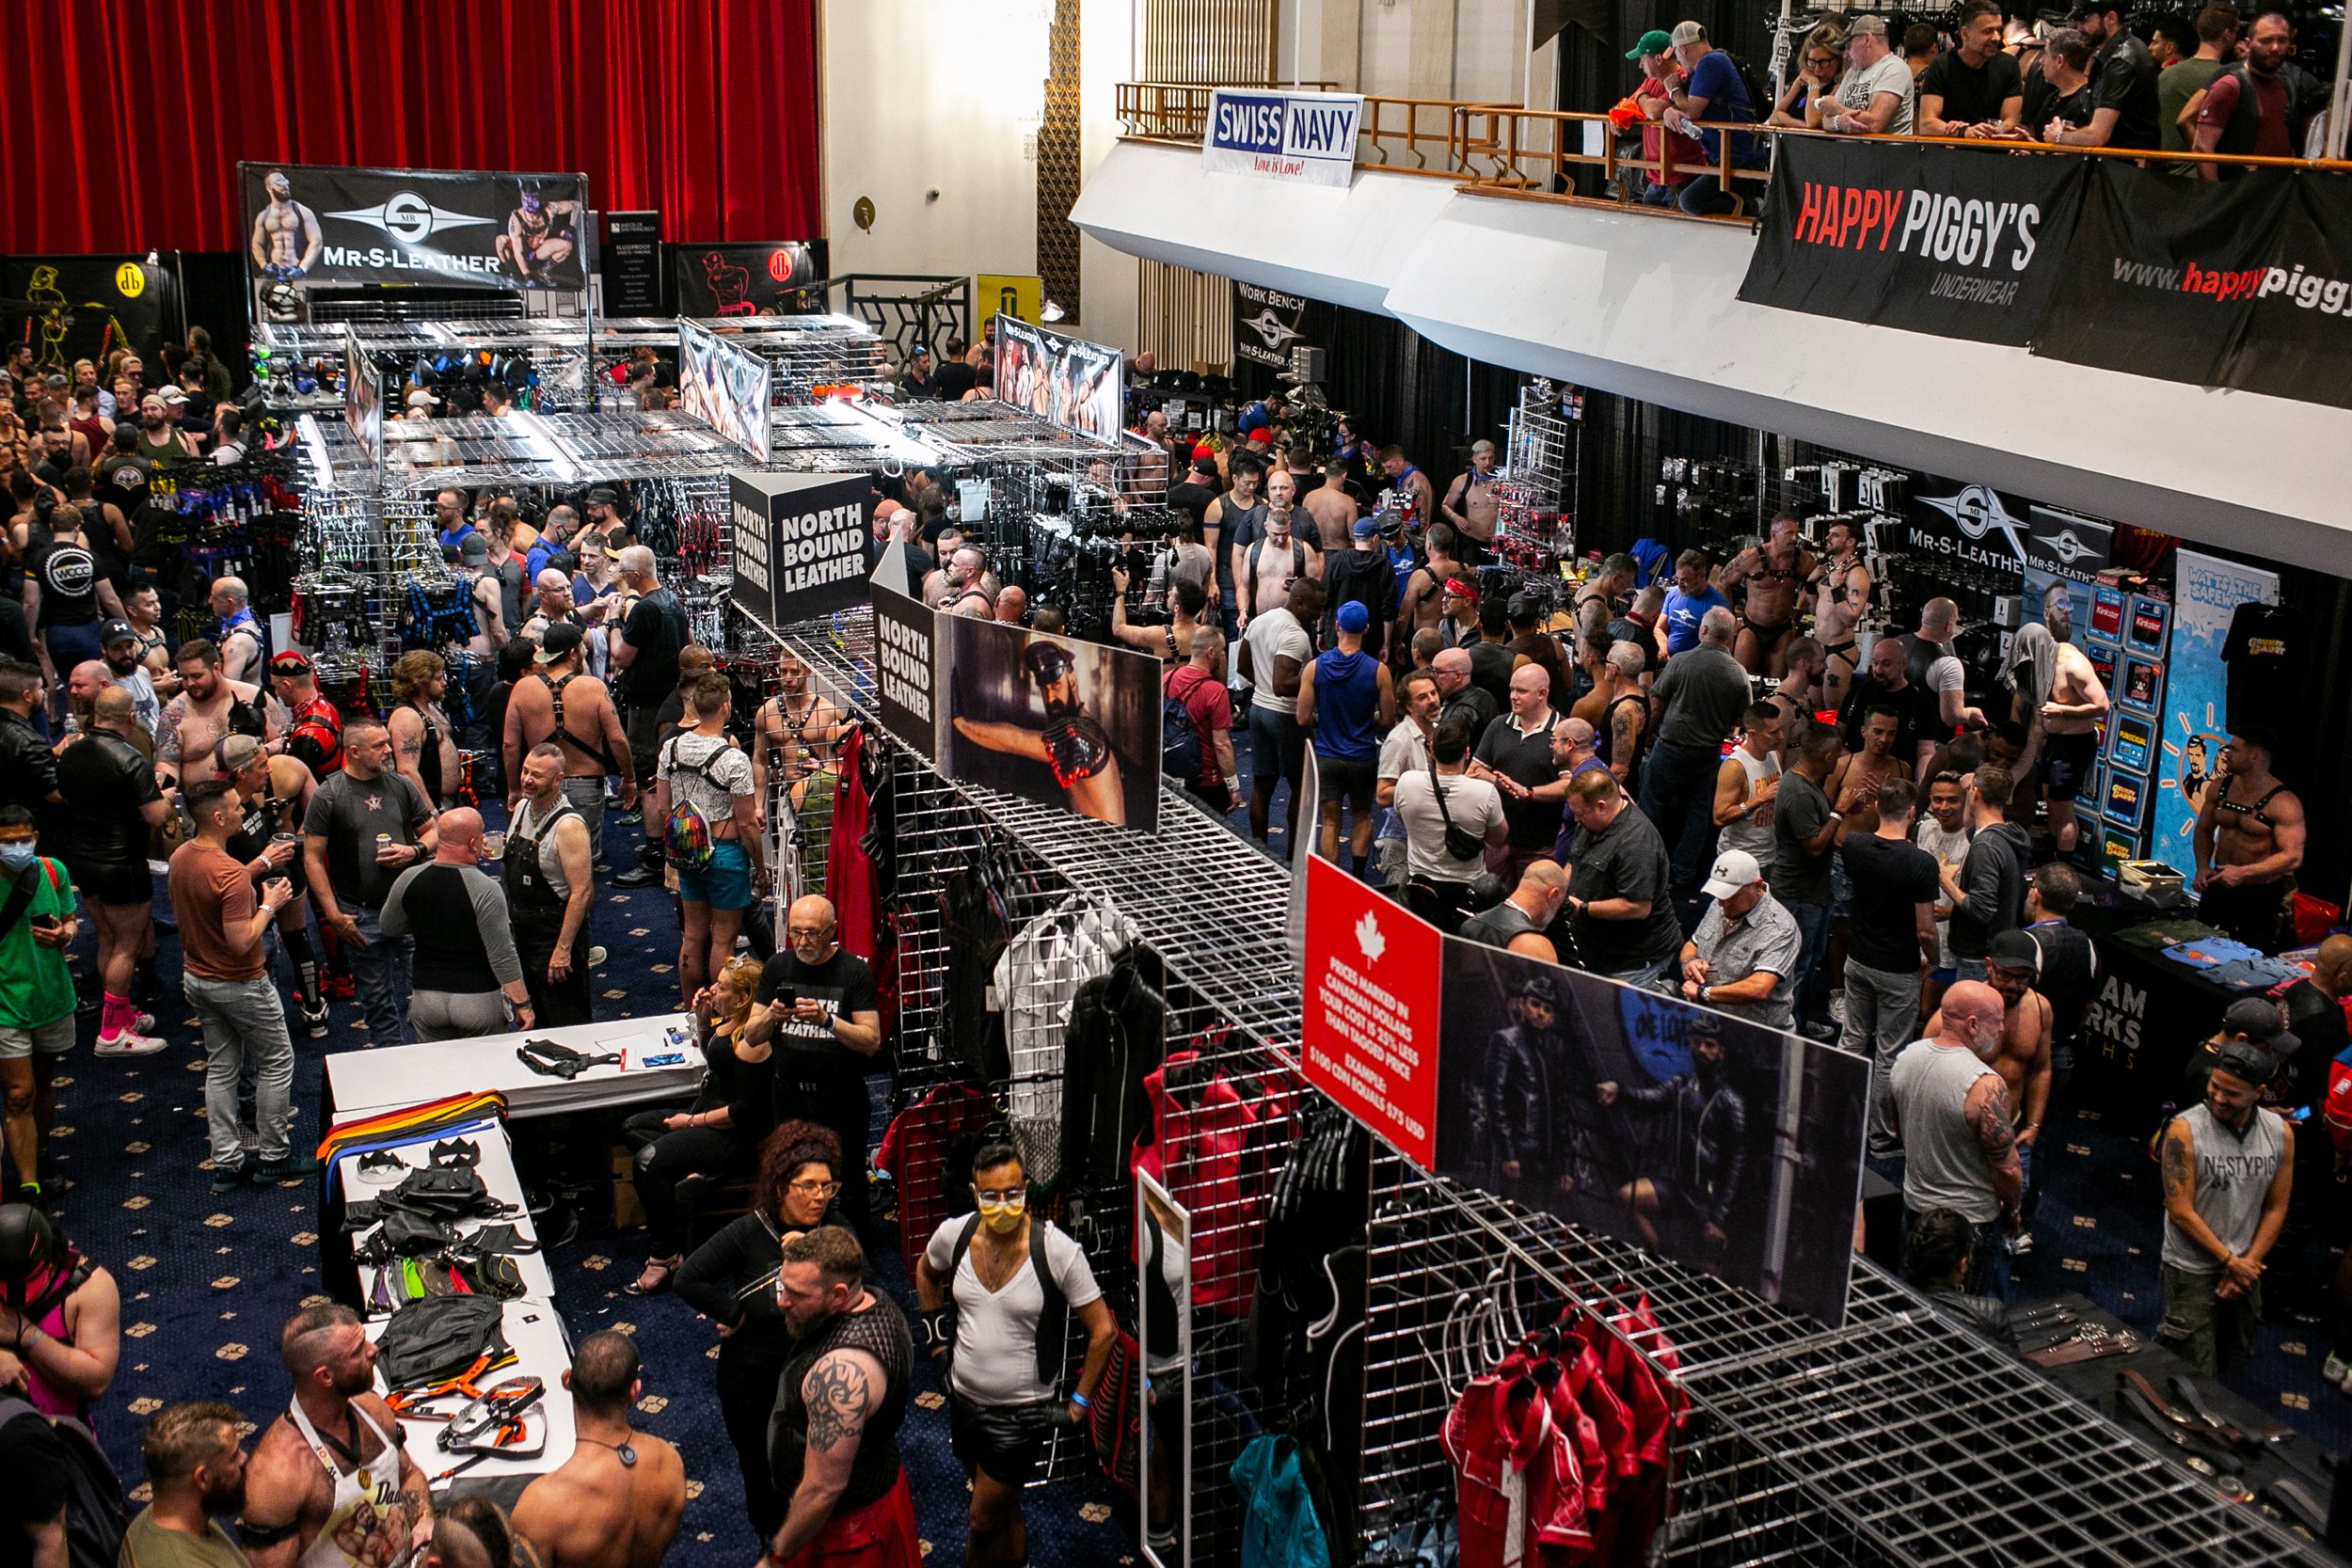  A view of the leather market, during iml 44 ON Friday, may 27th, 2022.  